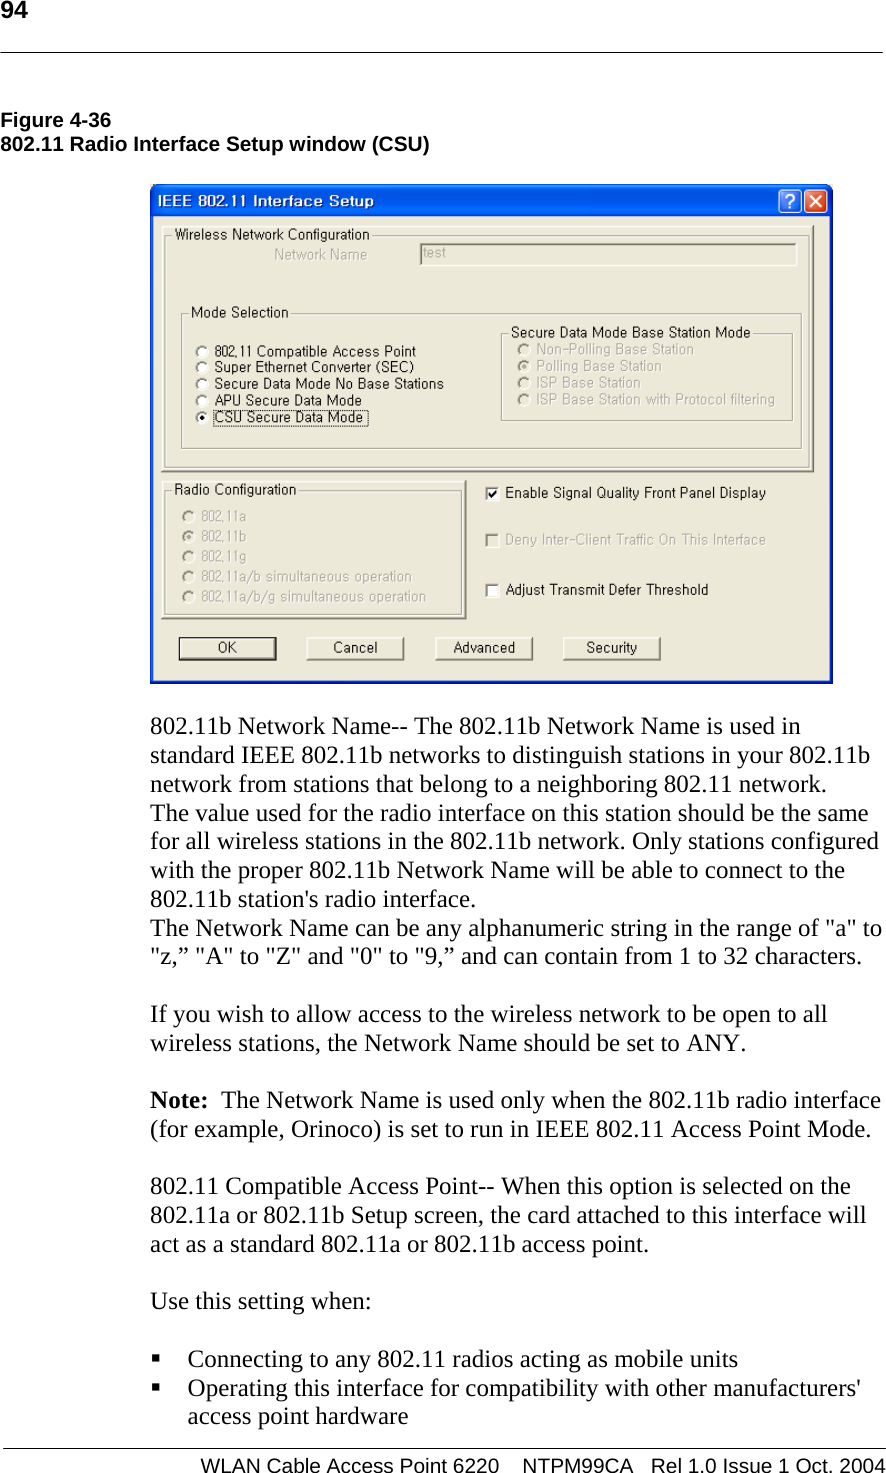   94   Figure 4-36 802.11 Radio Interface Setup window (CSU)     802.11b Network Name-- The 802.11b Network Name is used in standard IEEE 802.11b networks to distinguish stations in your 802.11b network from stations that belong to a neighboring 802.11 network.  The value used for the radio interface on this station should be the same for all wireless stations in the 802.11b network. Only stations configured with the proper 802.11b Network Name will be able to connect to the 802.11b station&apos;s radio interface. The Network Name can be any alphanumeric string in the range of &quot;a&quot; to &quot;z,” &quot;A&quot; to &quot;Z&quot; and &quot;0&quot; to &quot;9,” and can contain from 1 to 32 characters.  If you wish to allow access to the wireless network to be open to all wireless stations, the Network Name should be set to ANY.  Note:  The Network Name is used only when the 802.11b radio interface (for example, Orinoco) is set to run in IEEE 802.11 Access Point Mode.    802.11 Compatible Access Point-- When this option is selected on the 802.11a or 802.11b Setup screen, the card attached to this interface will act as a standard 802.11a or 802.11b access point.   Use this setting when:   Connecting to any 802.11 radios acting as mobile units  Operating this interface for compatibility with other manufacturers&apos; access point hardware WLAN Cable Access Point 6220    NTPM99CA   Rel 1.0 Issue 1 Oct. 2004